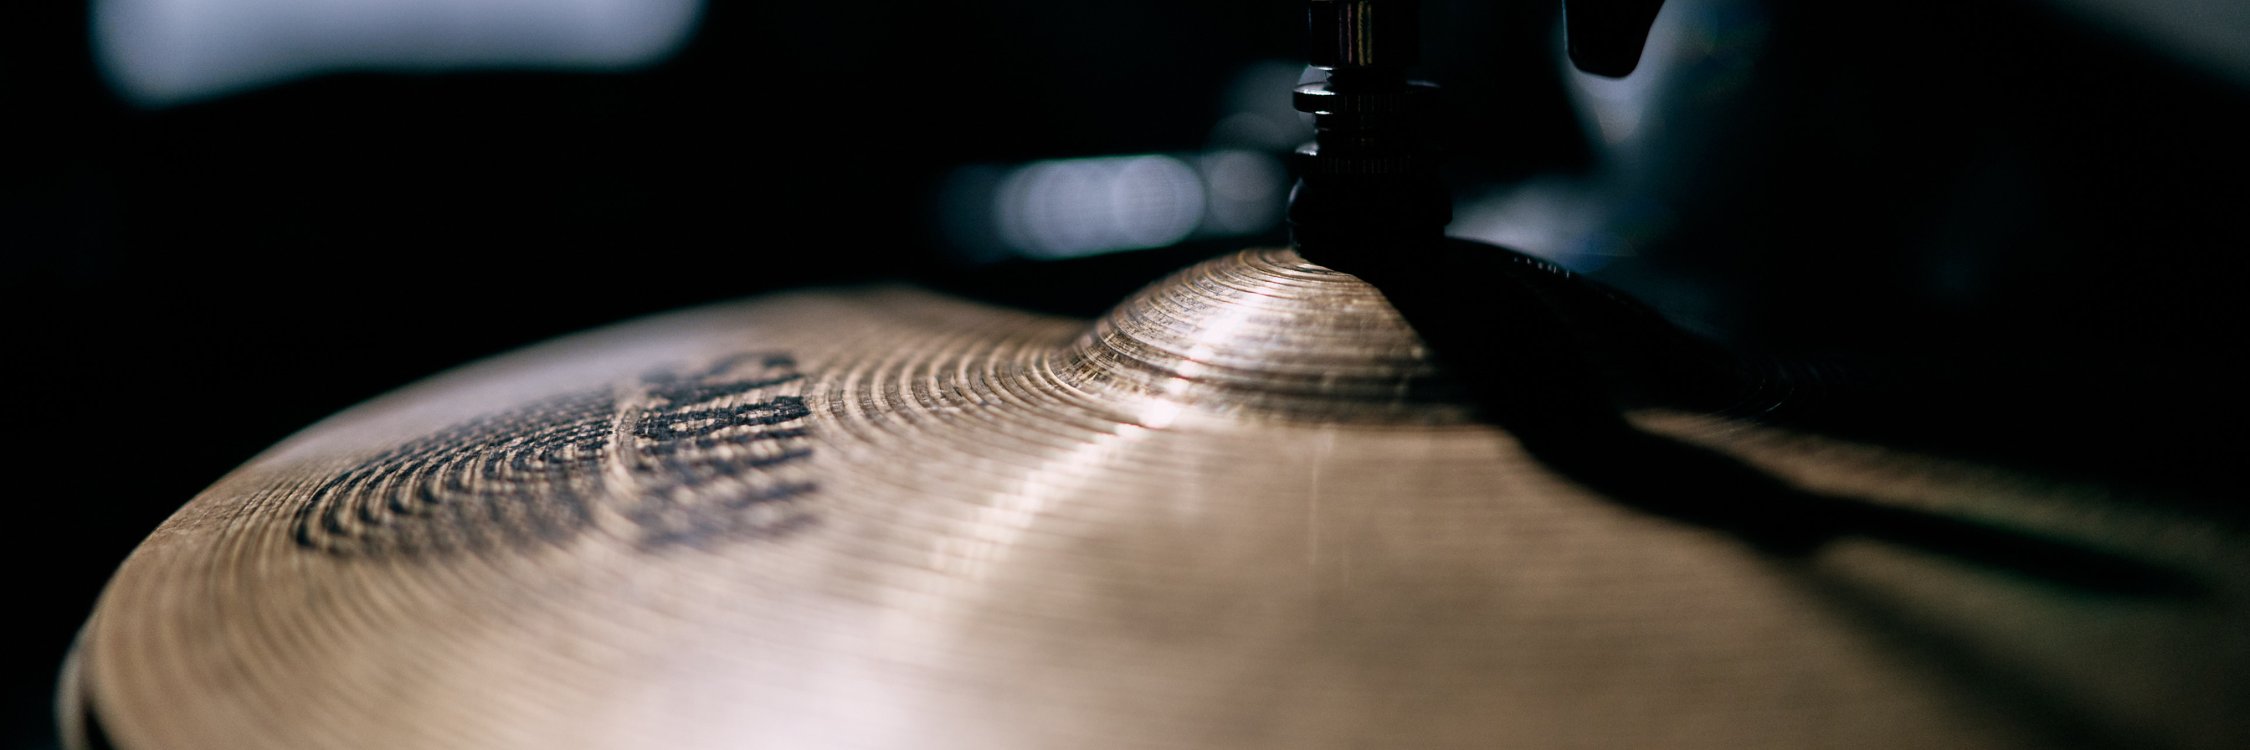 cymbal son of drum